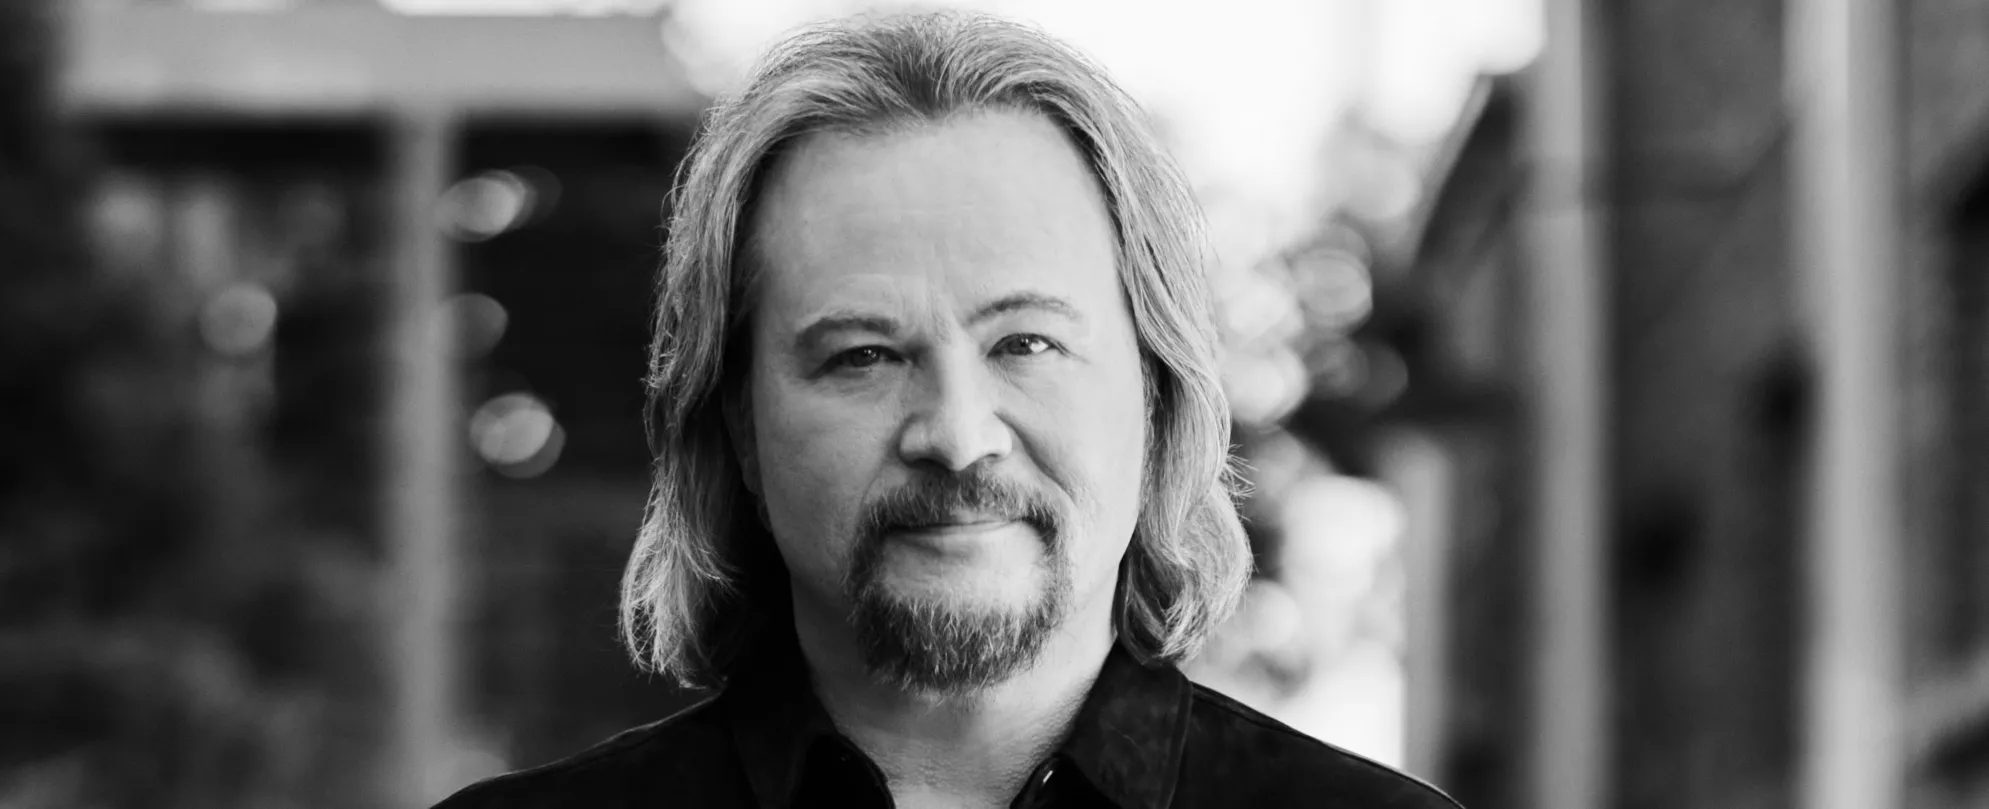 Country Star Travis Tritt Cancels Upcoming Shows Requiring COVID Vaccinations, Negative Tests or Masks